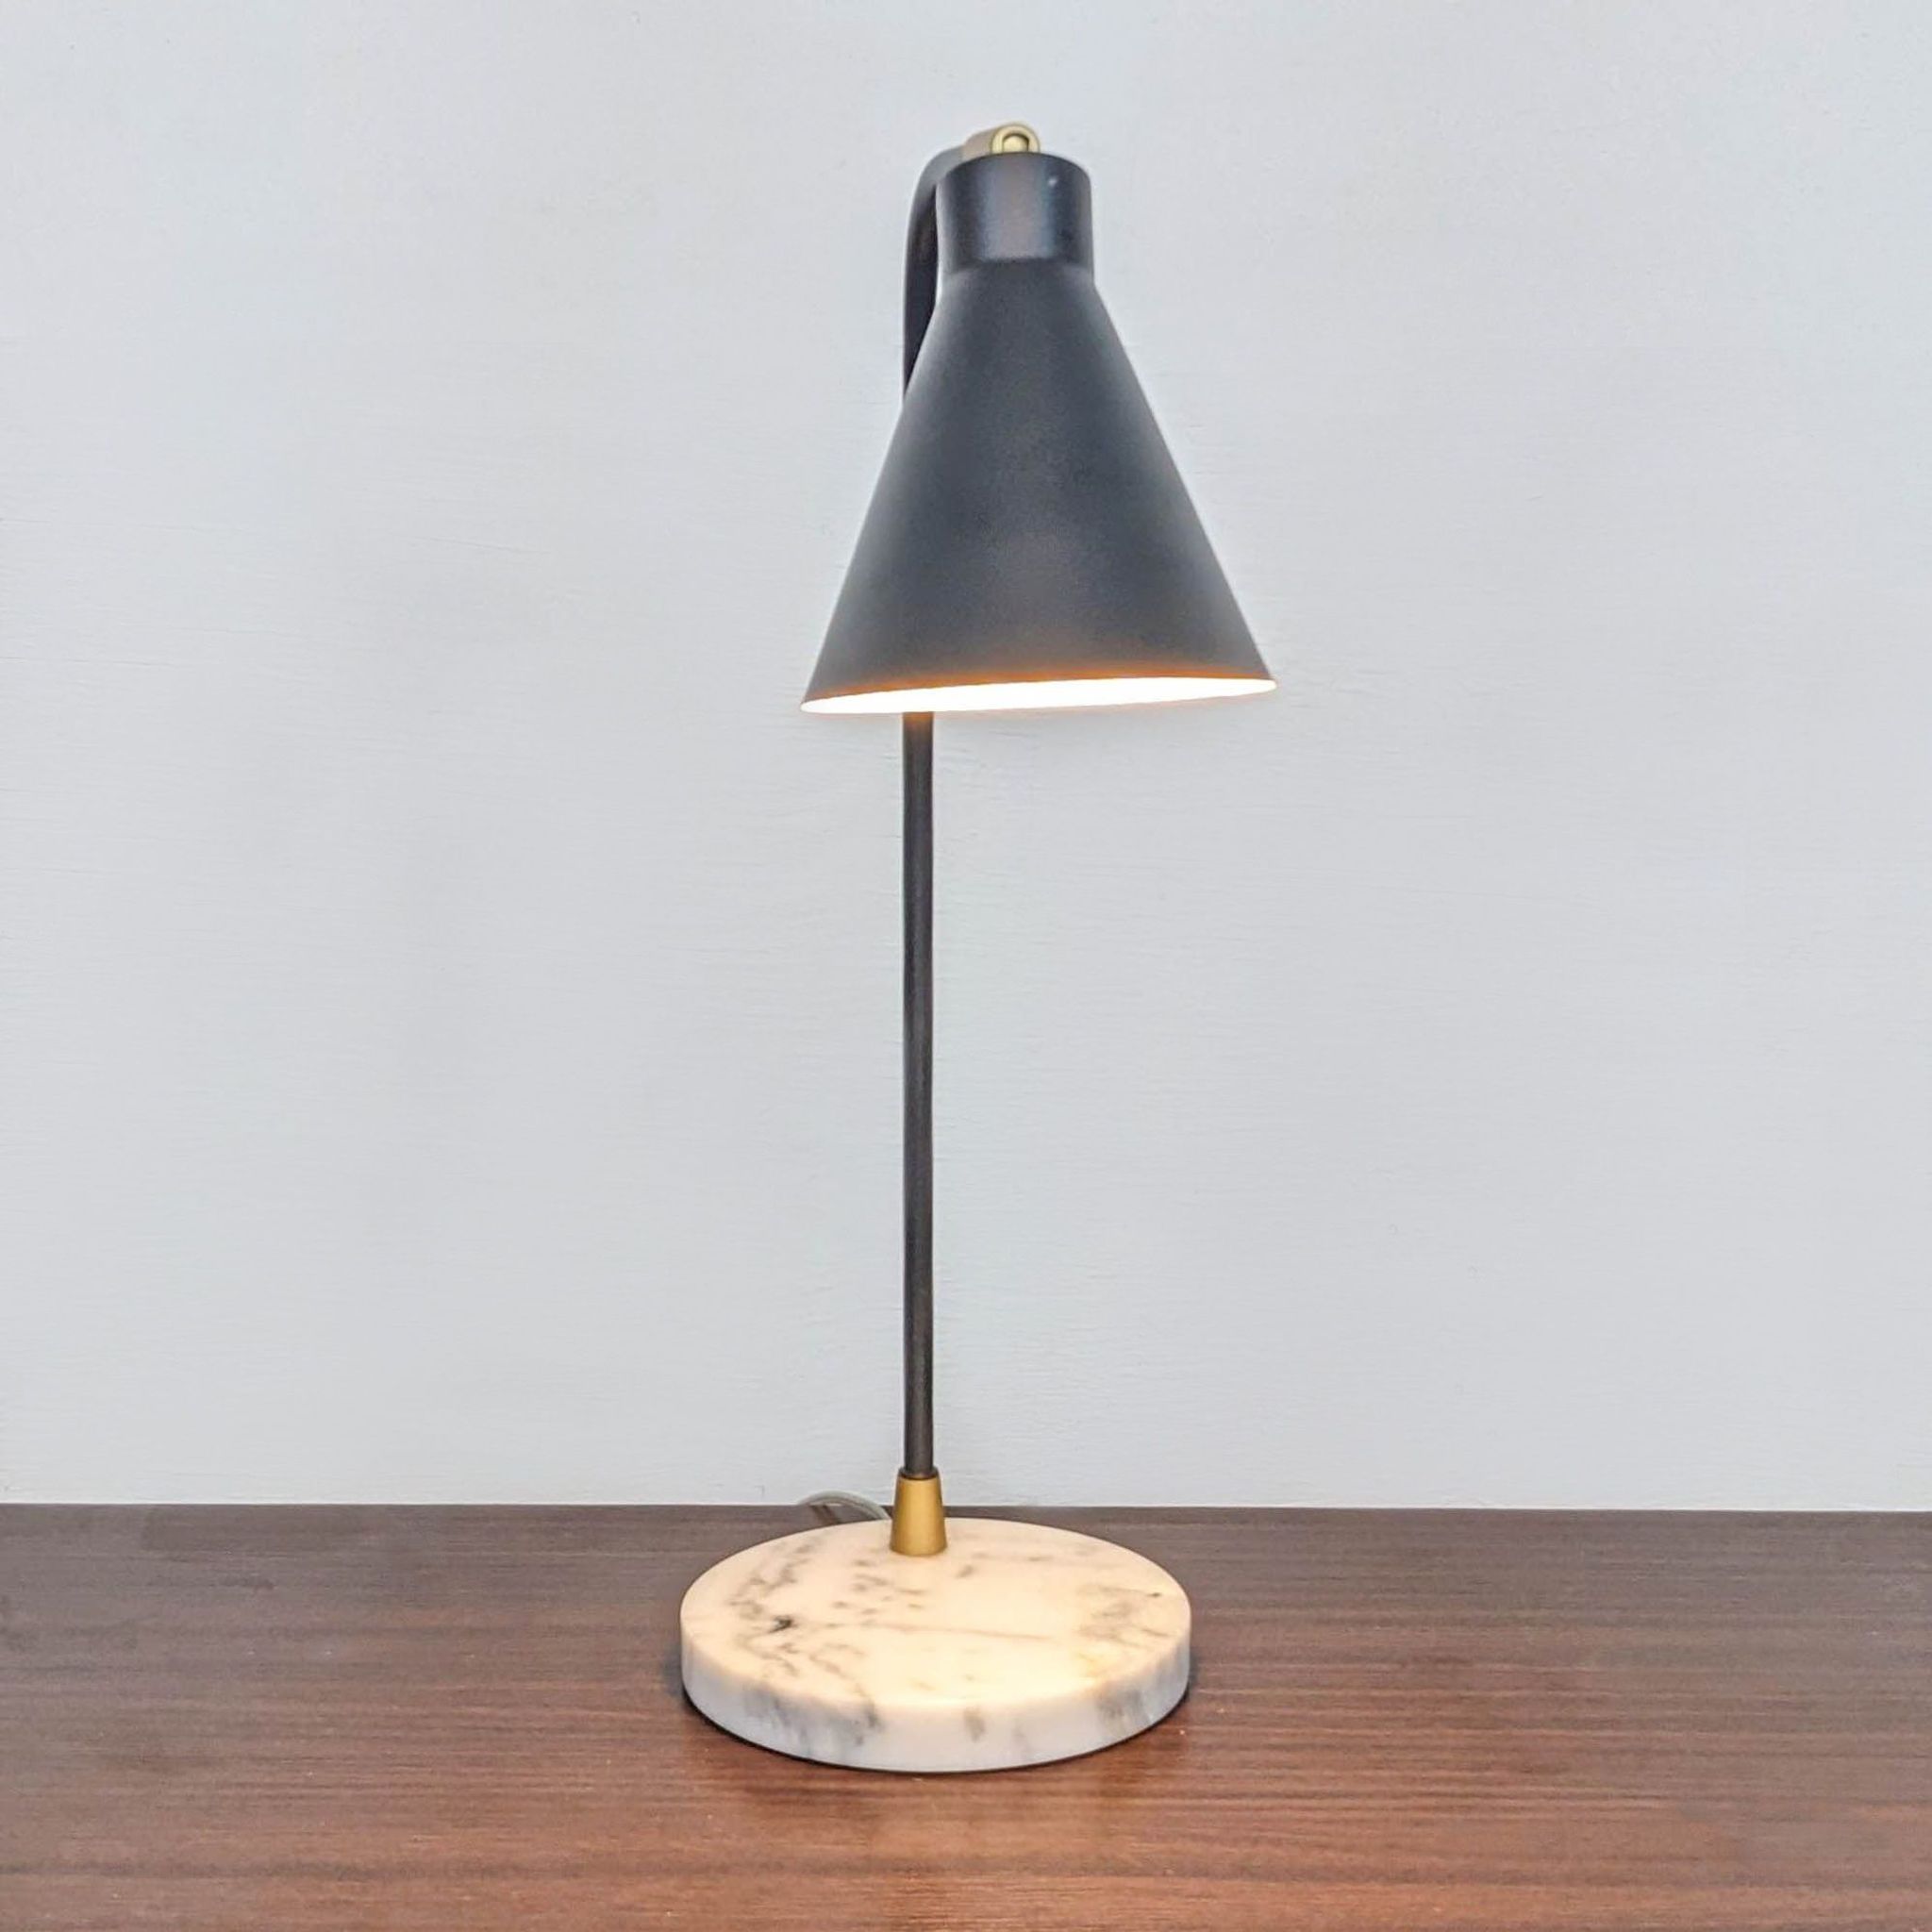 Reperch black desk lamp with cone-shaped shade and marble base on wooden surface, illuminated.